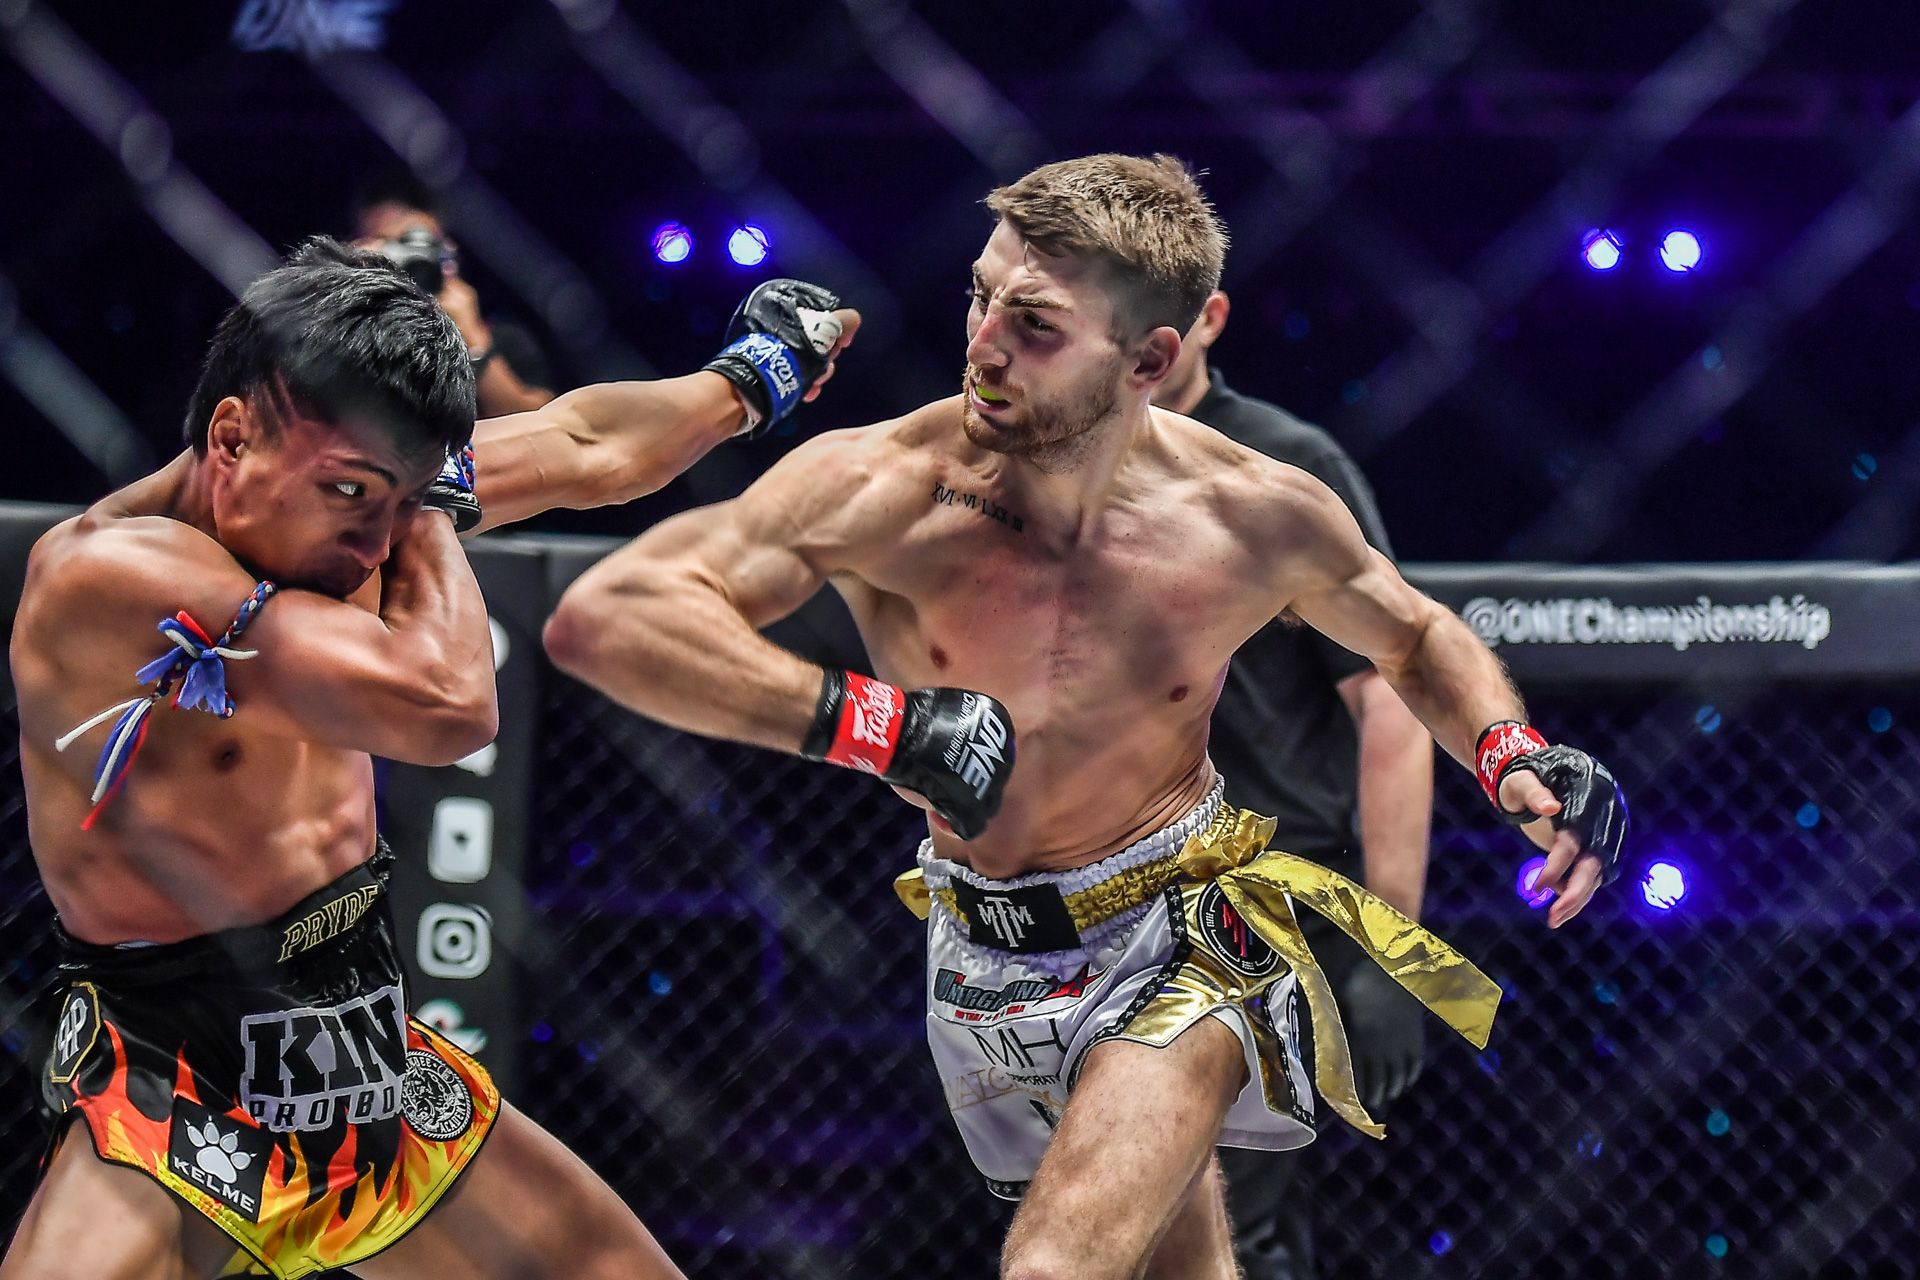 Jonathan Haggerty hitting a punch in ONE Championship